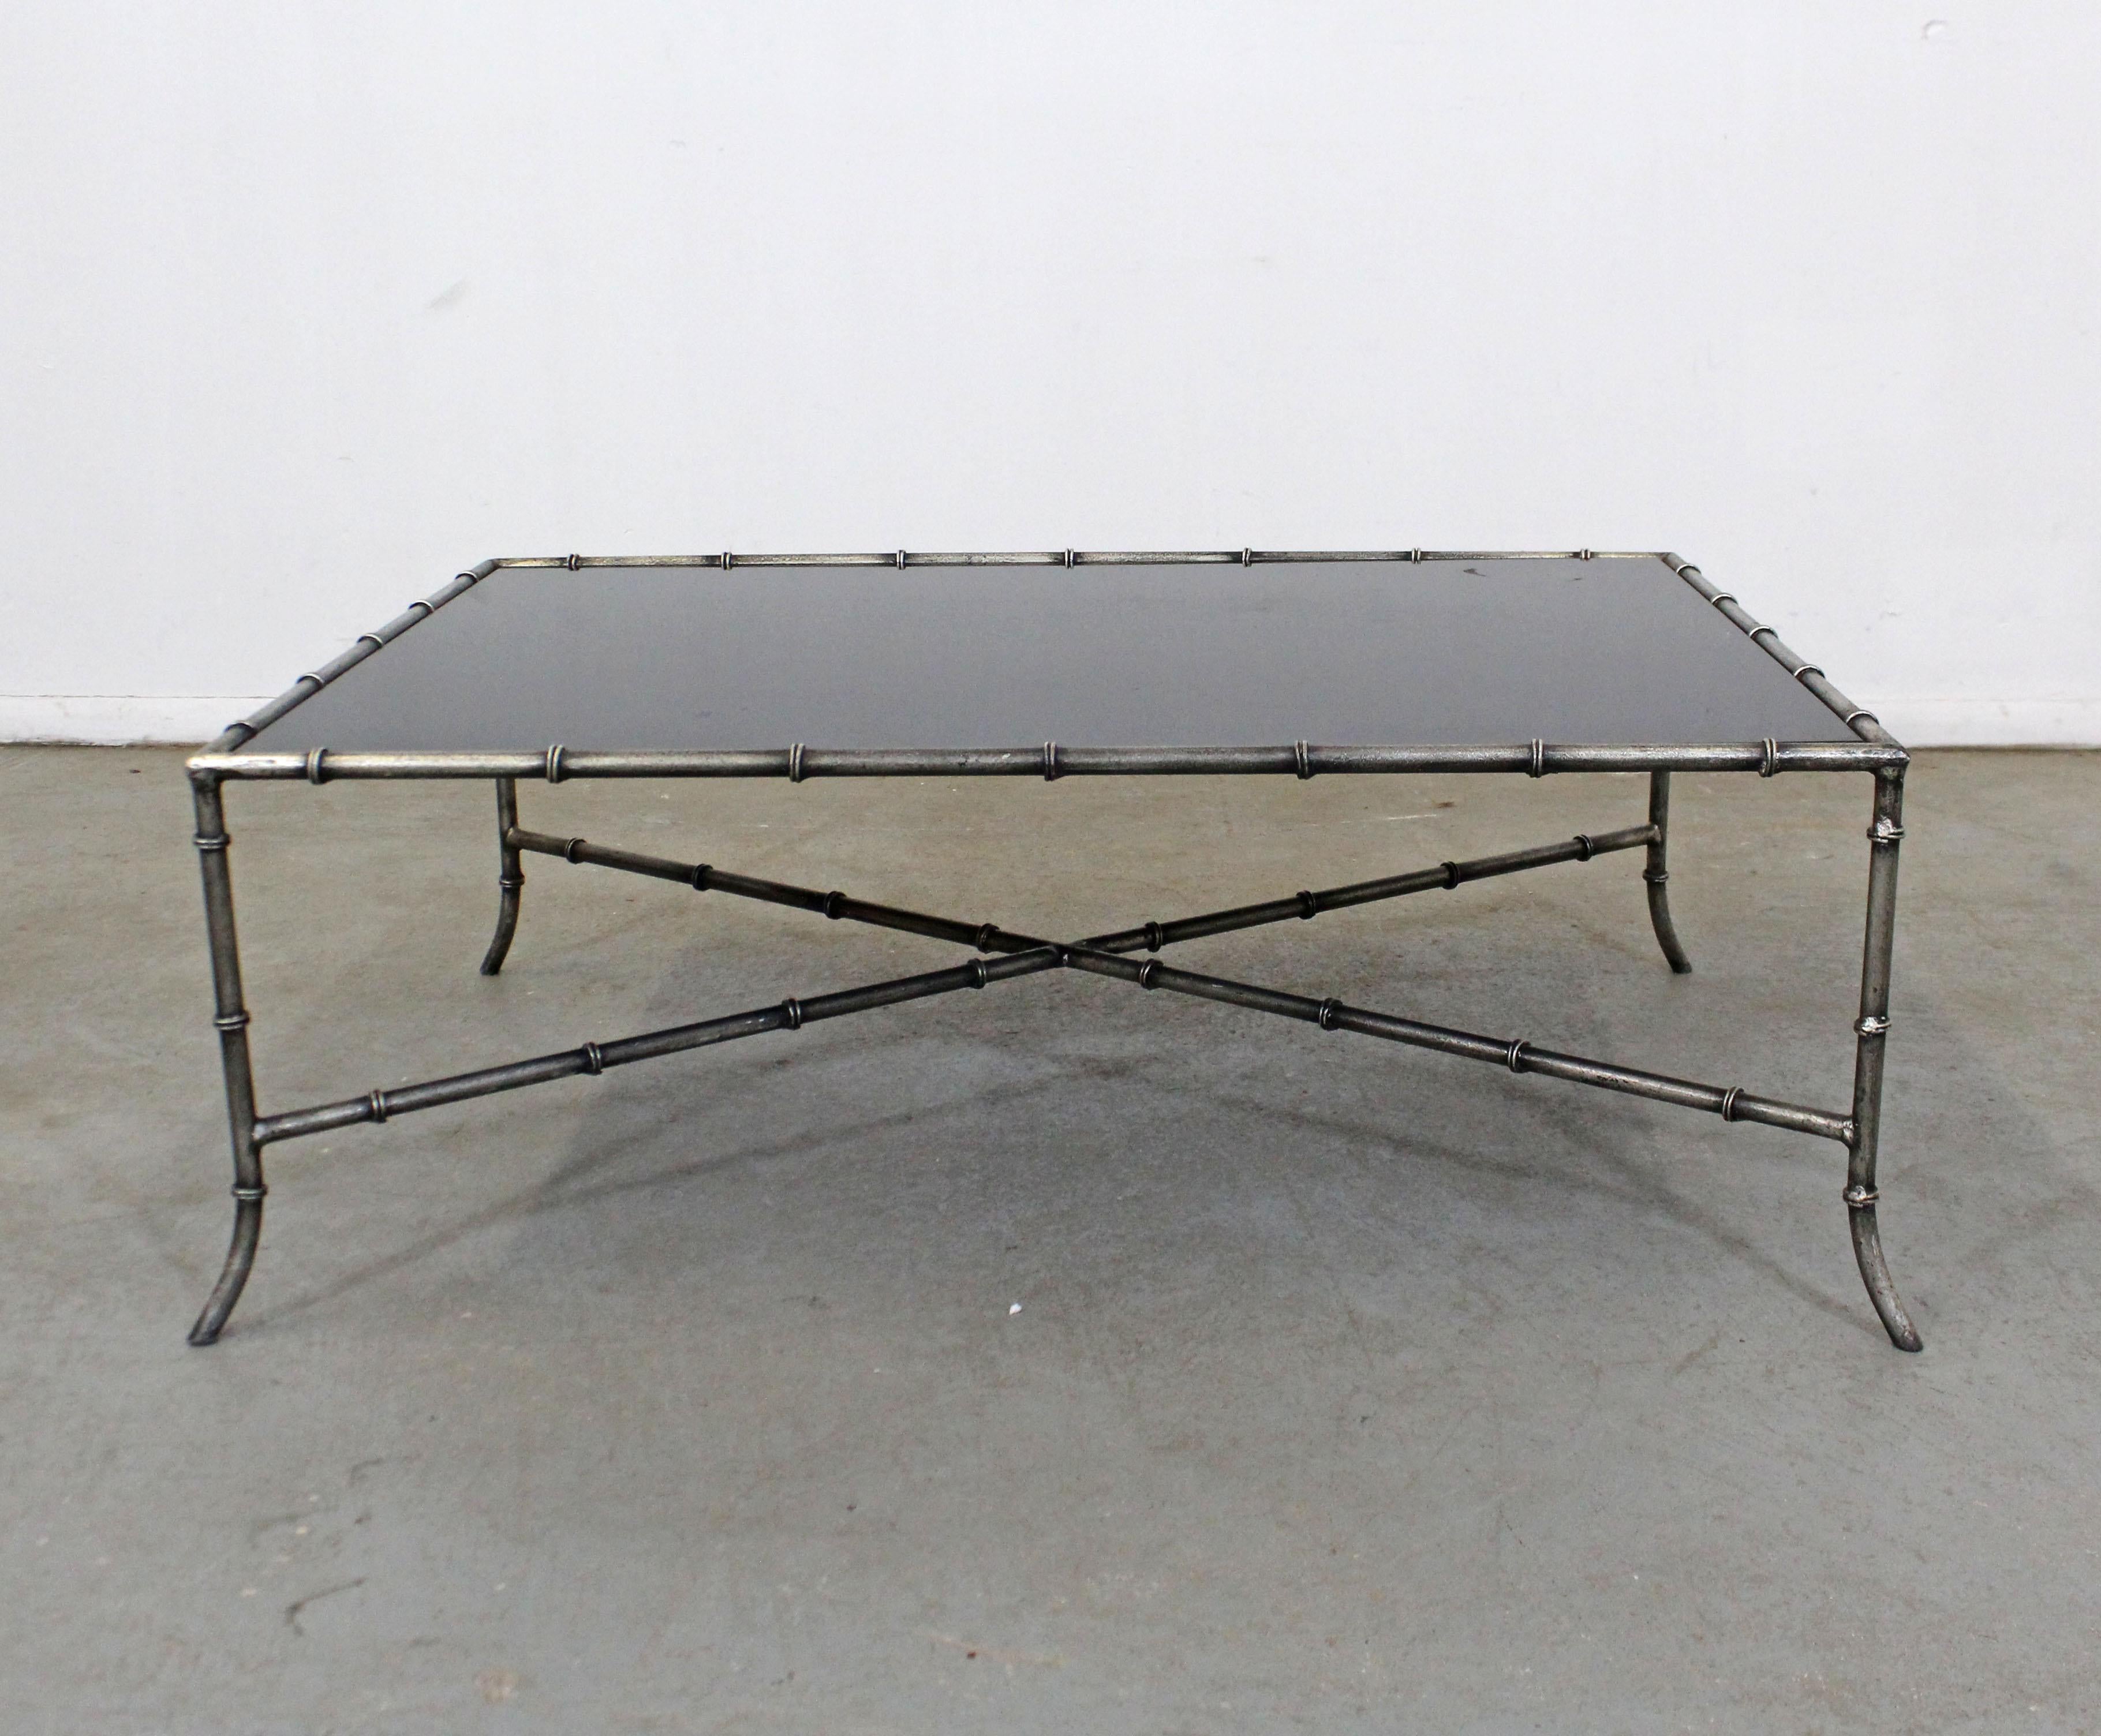 Offered is a vintage iron and glass table similar to the style of Maison Baguès with a faux bamboo look. This table has an iron base with a blacked-out glass top. It is in good structurally sound condition with some cosmetic wear including age wear